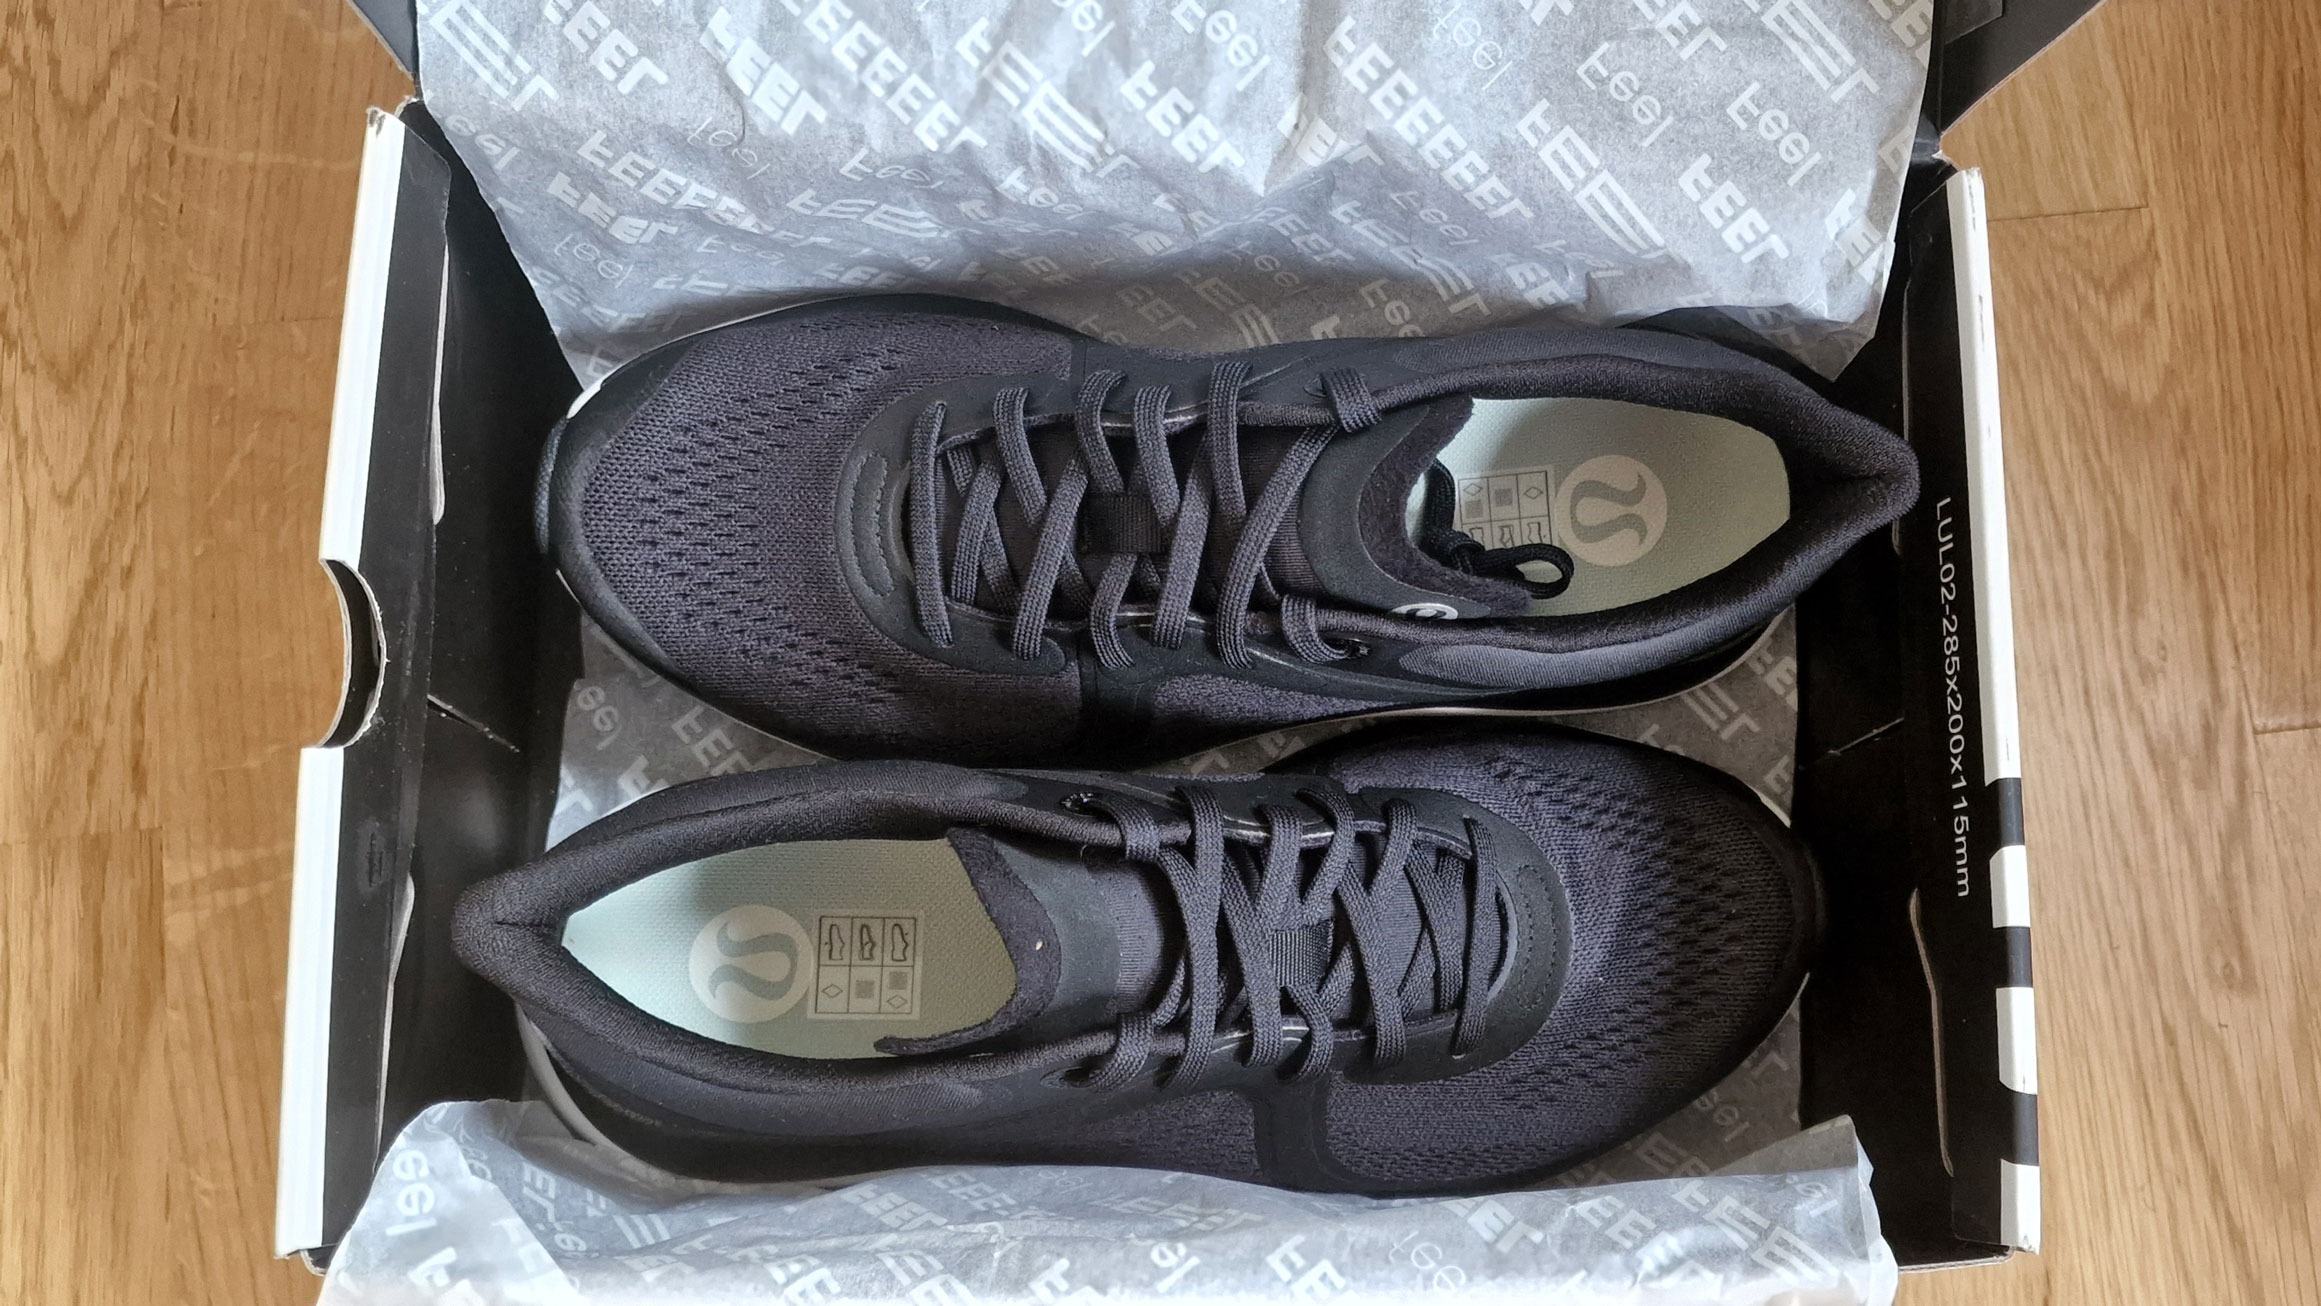 Lululemon's workout shoes fail as running trainers